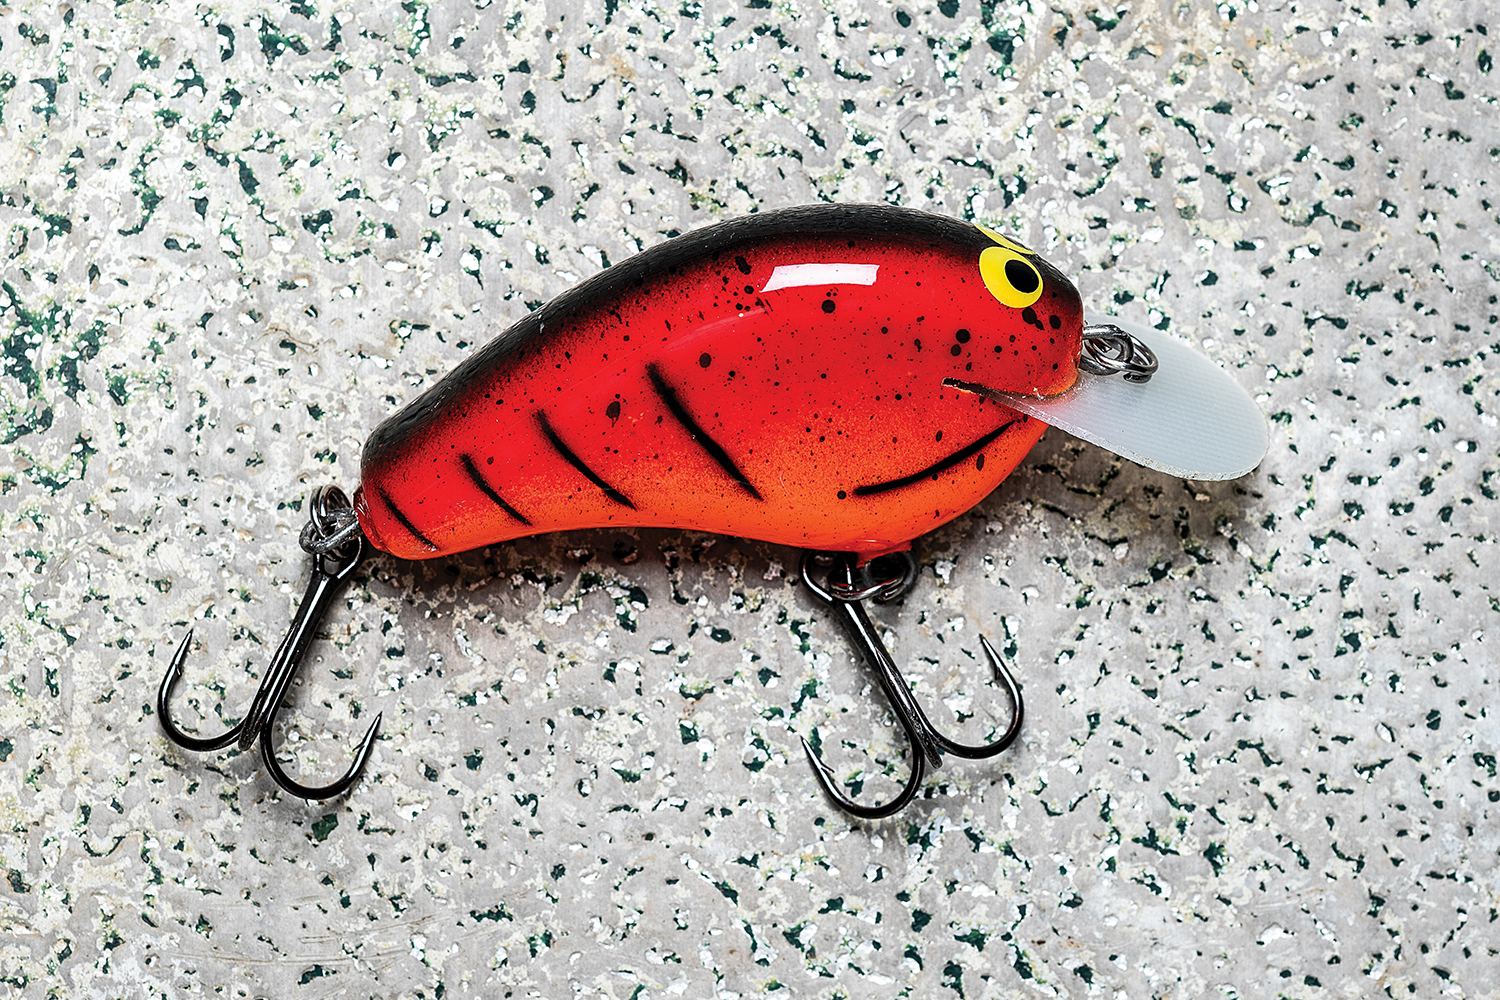 Making Homemade Fishing Lures for Bass